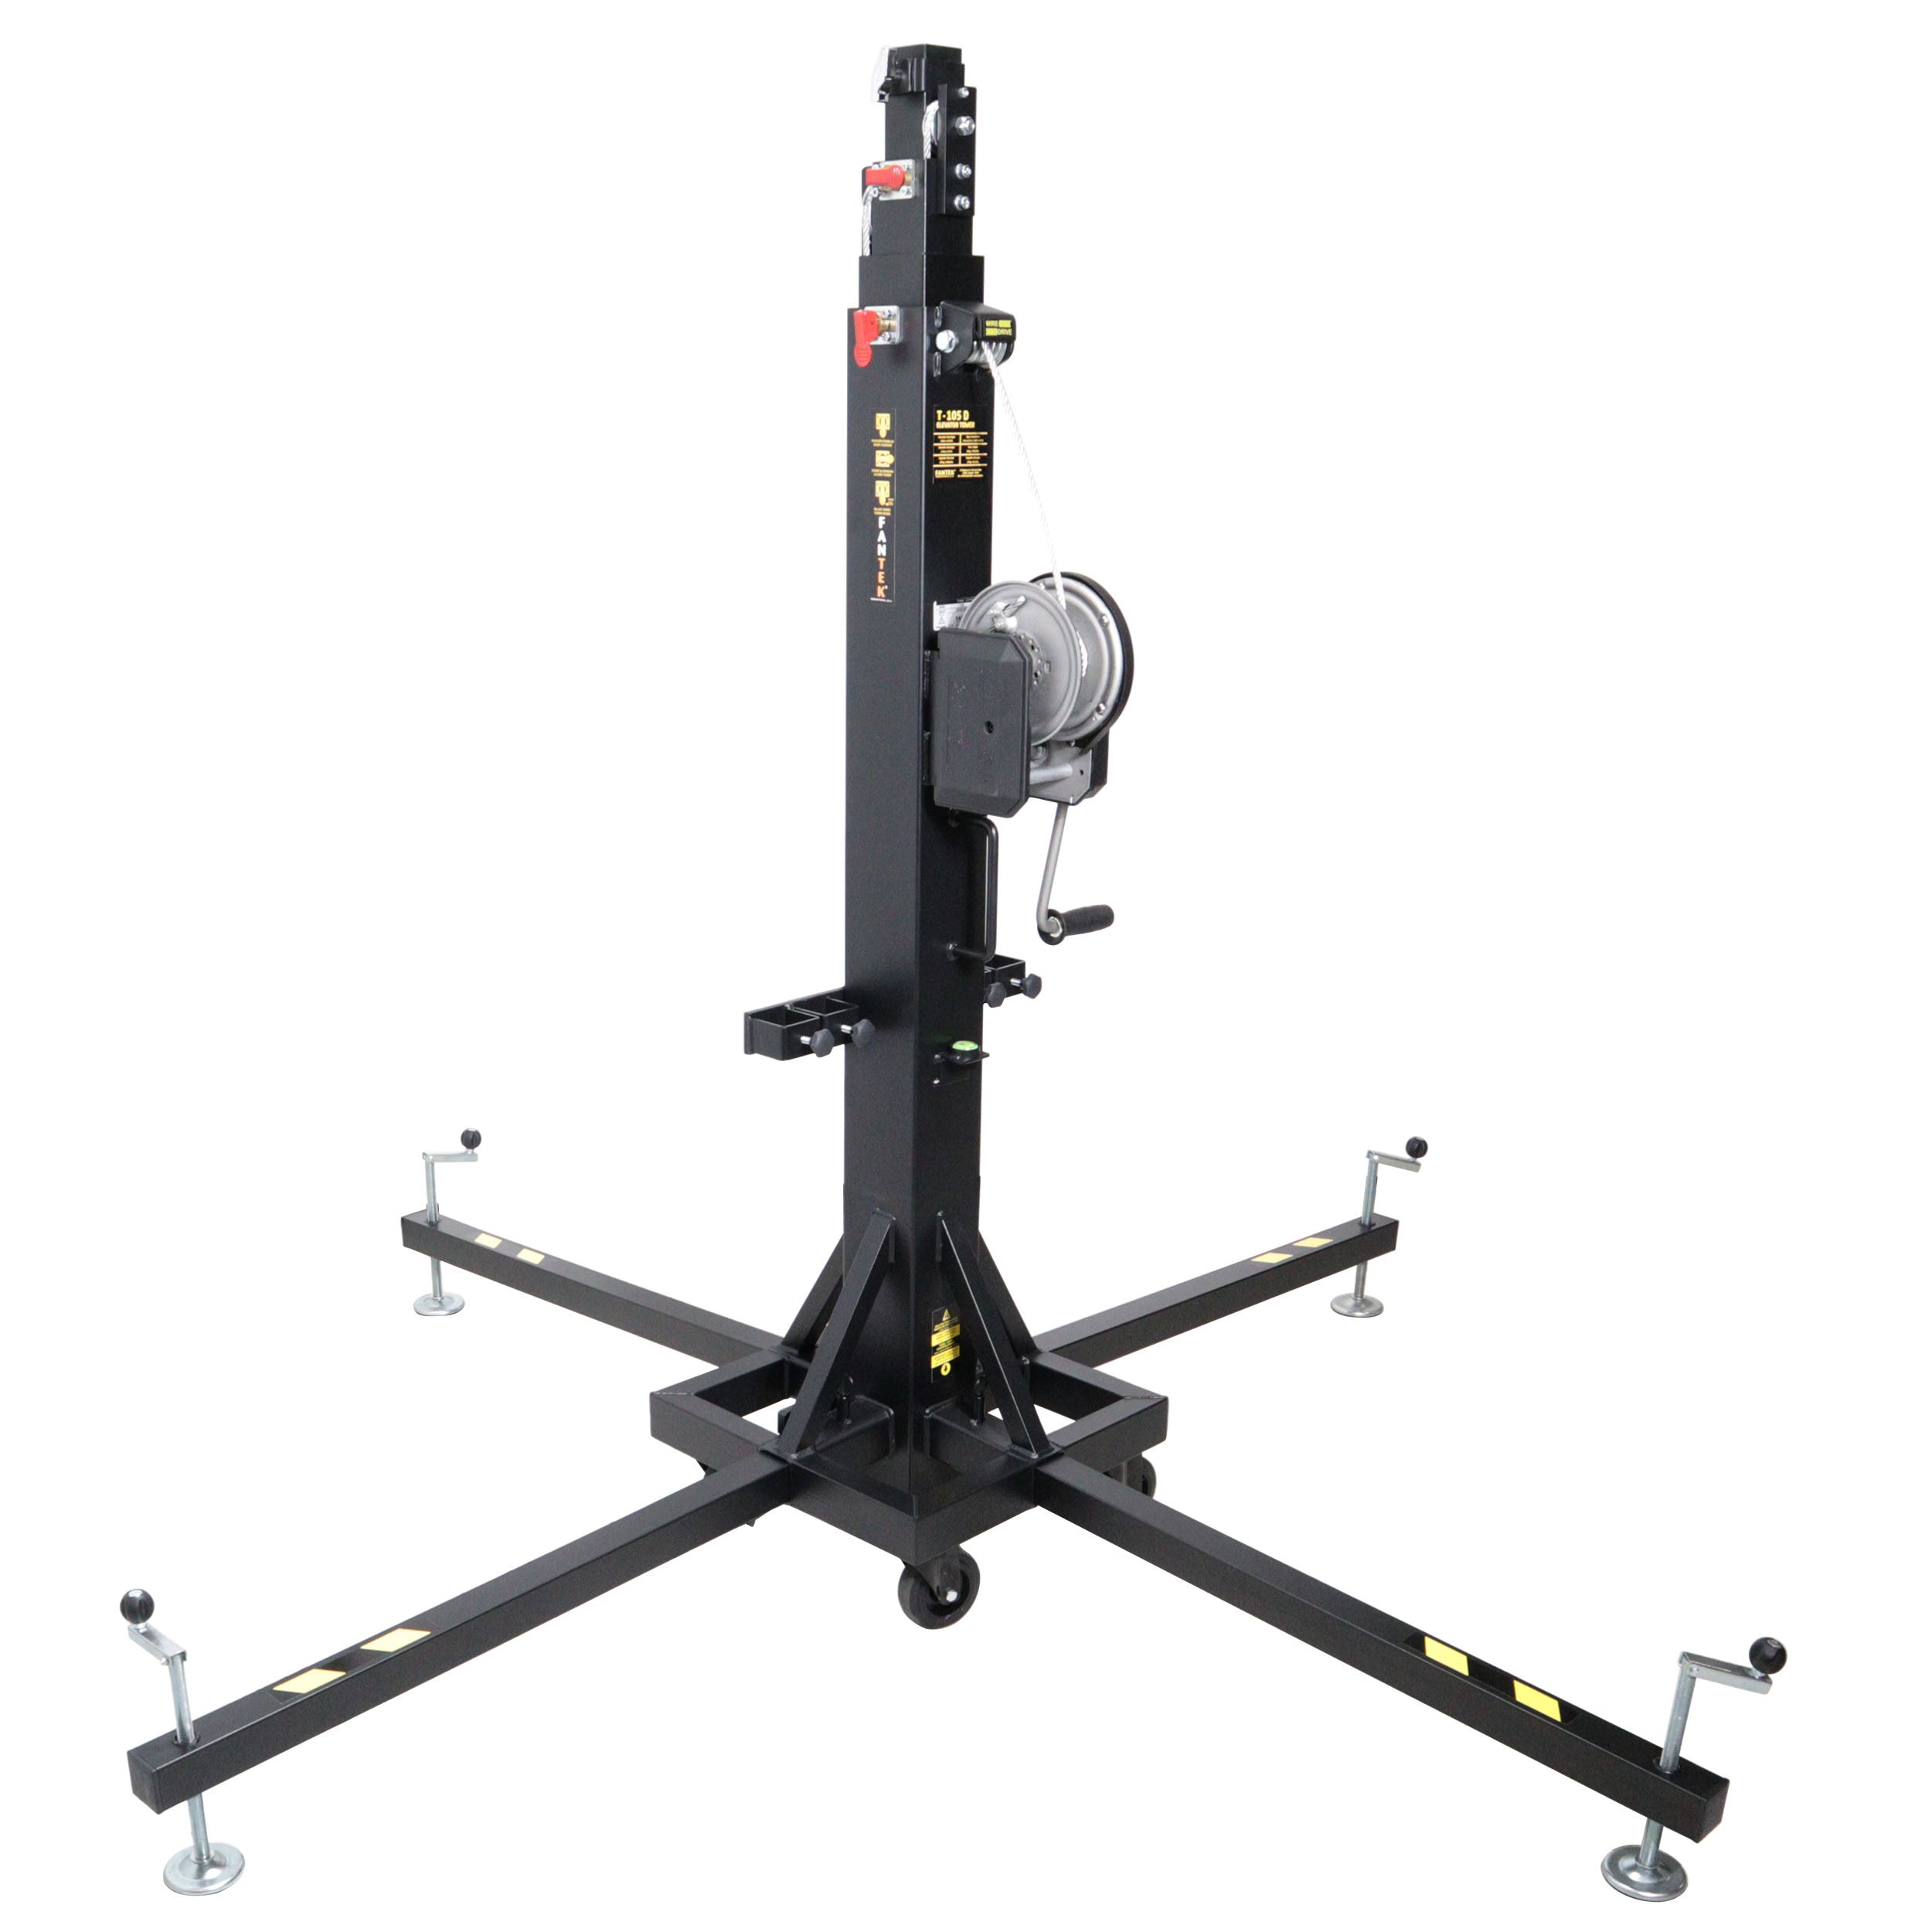 Pro X Top Loading Lifting tower - Capacity 496 lbs - Made in Spain by Fantek XTF-T106D